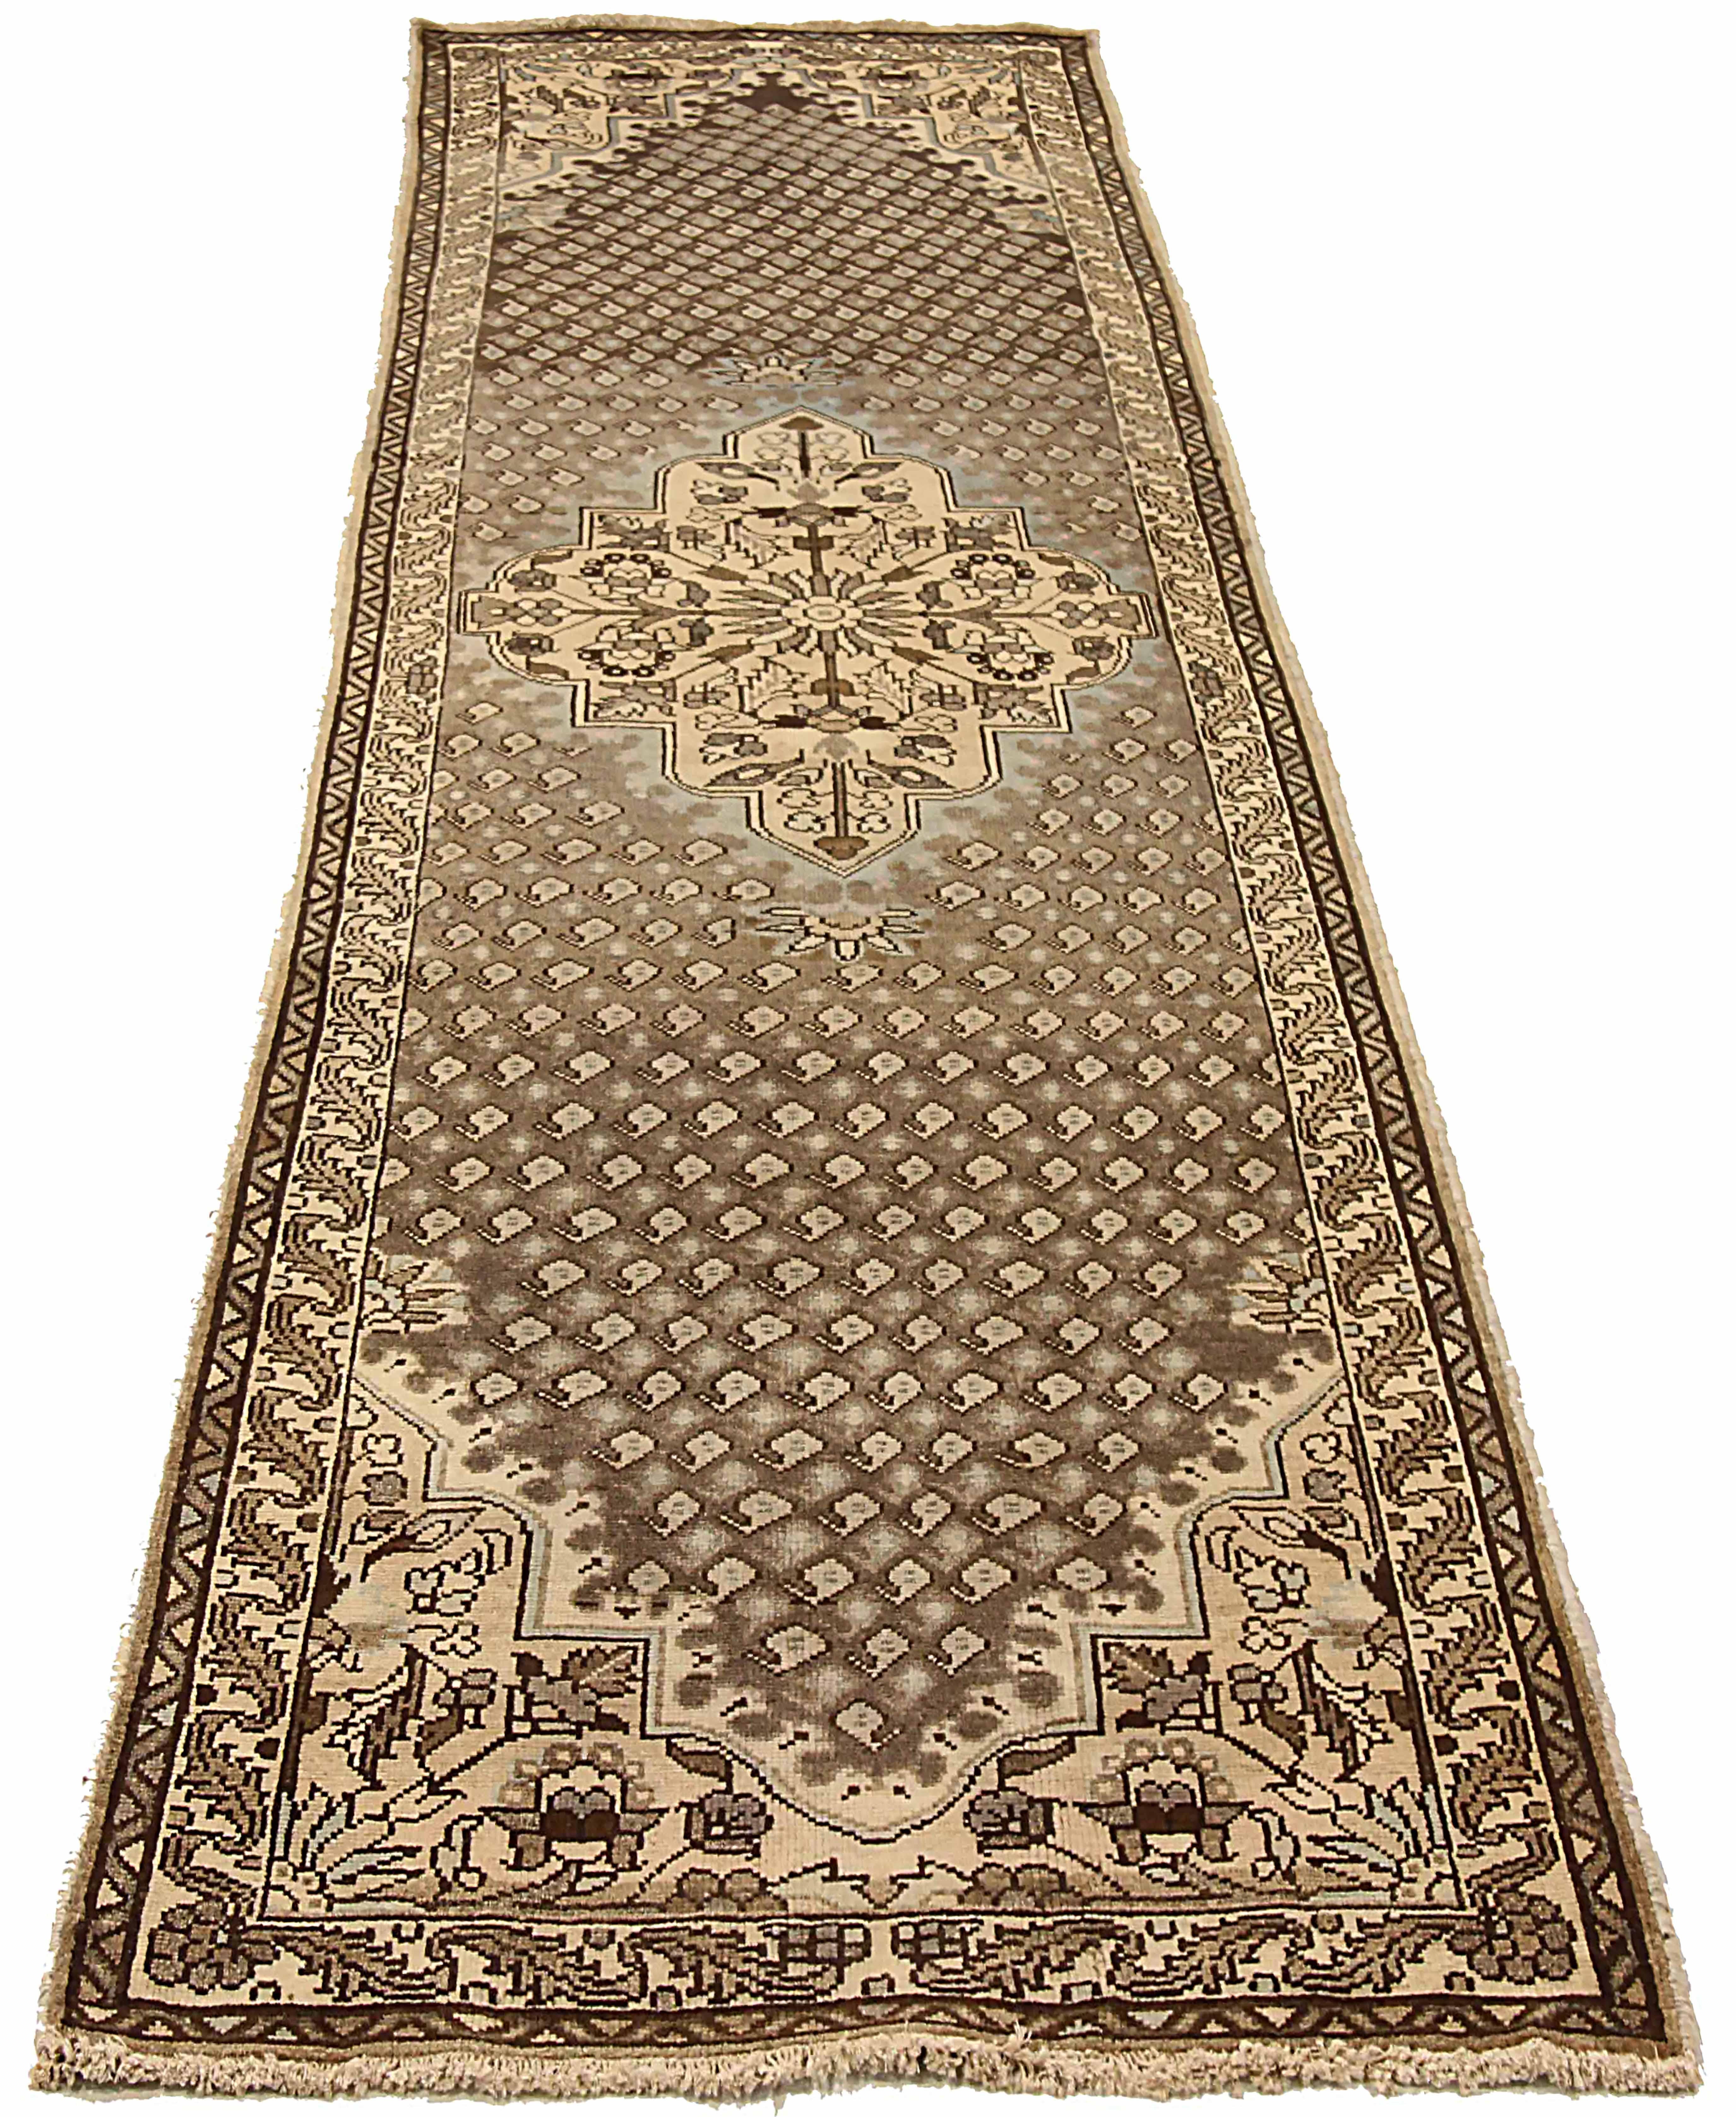 Antique Persian area rug handwoven from the finest sheep’s wool. It’s colored with all-natural vegetable dyes that are safe for humans and pets. It’s a traditional Malayer design handwoven by expert artisans. It’s a lovely runner rug that can be